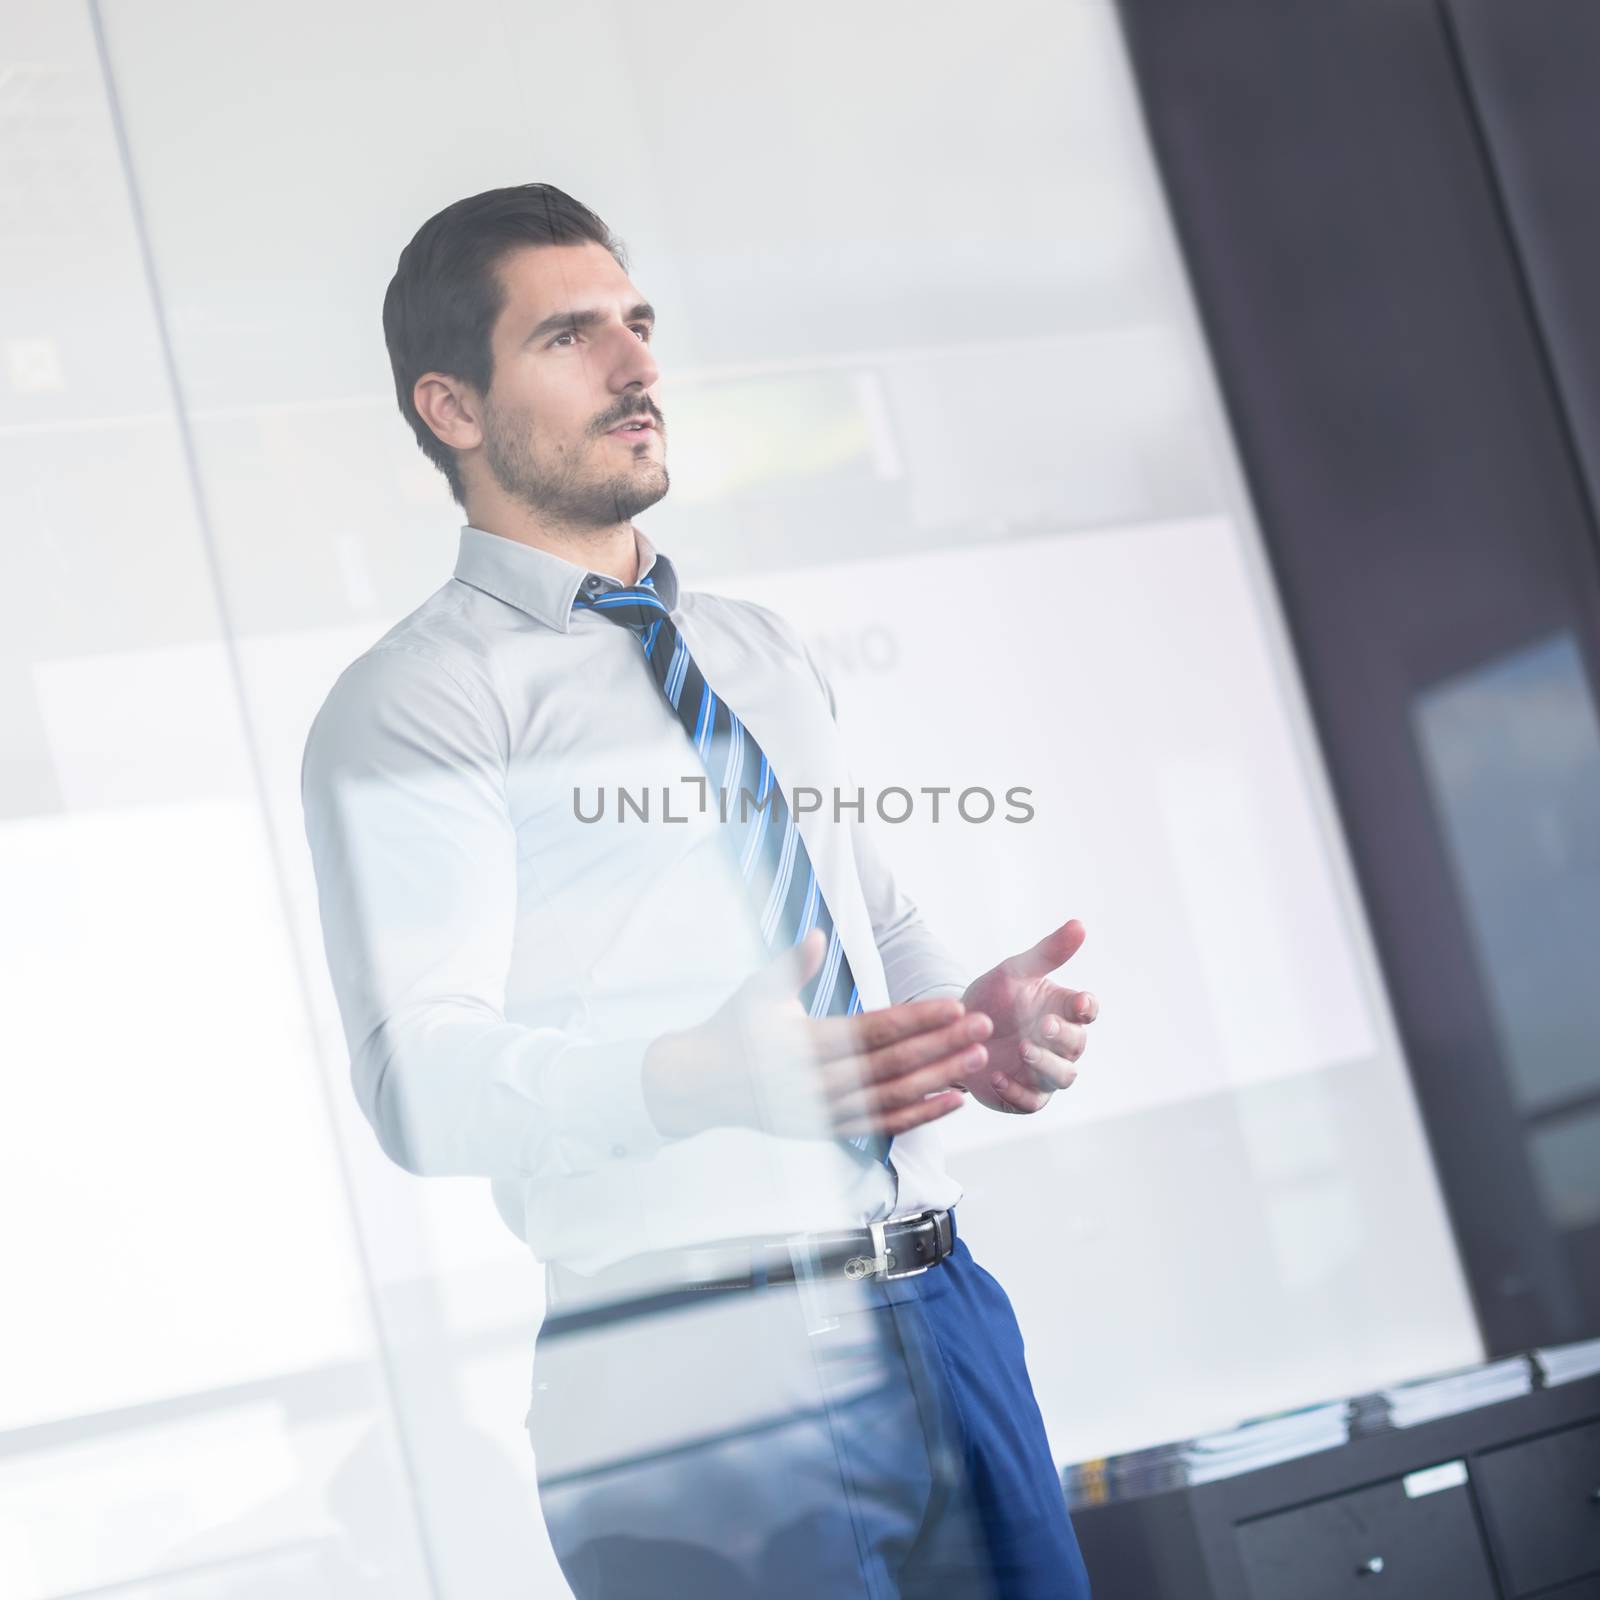 Business man making a presentation in front of whiteboard. View through glass.